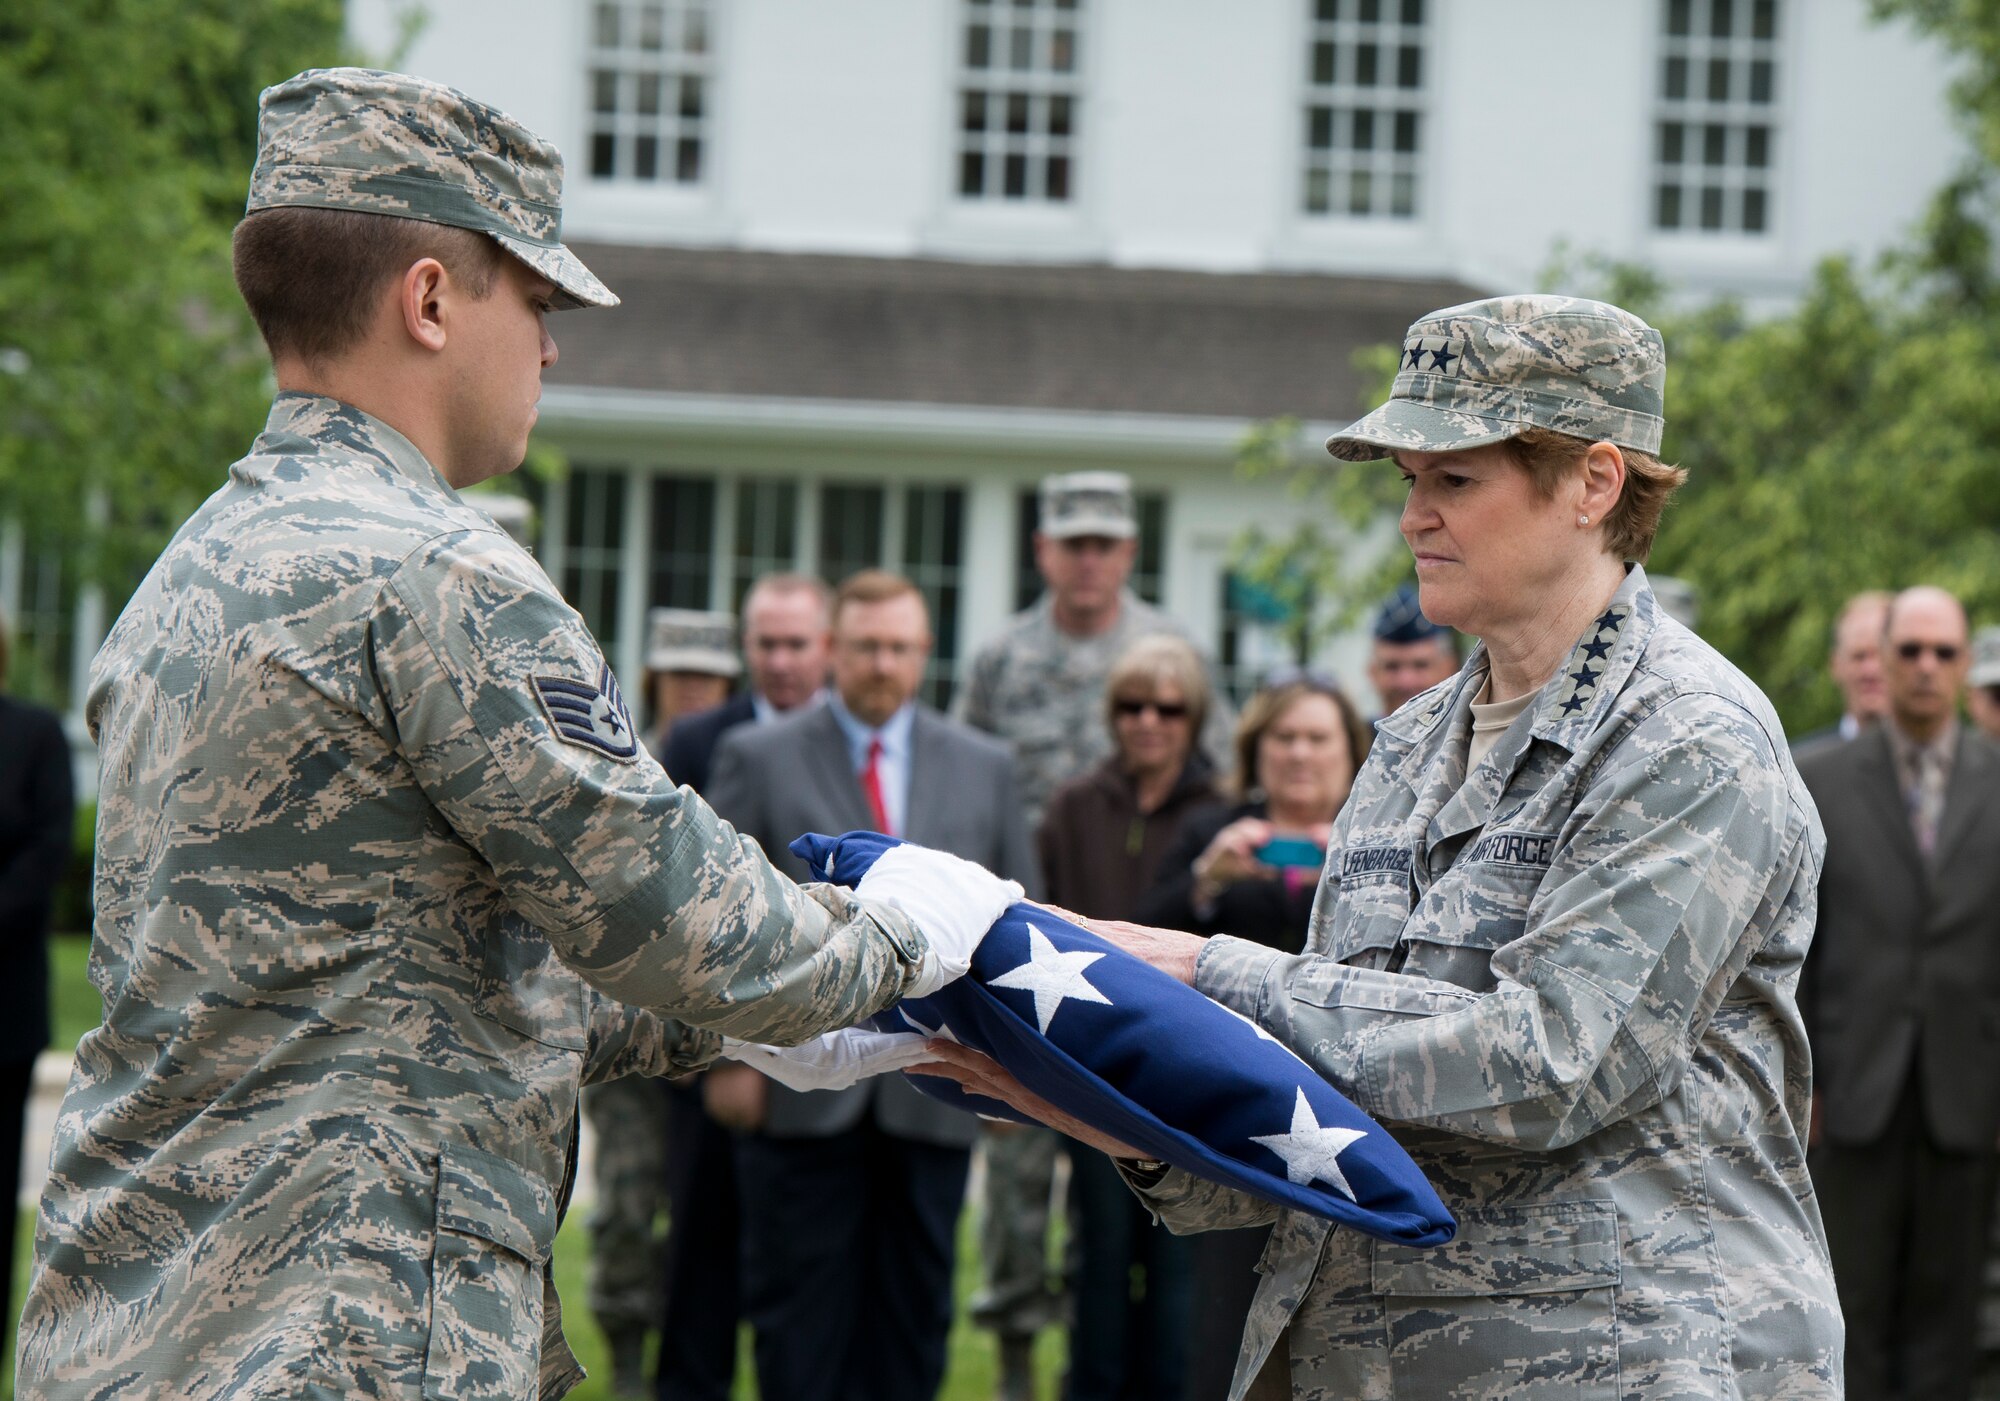 Gen. Janet C. Wolfenbarger, Air Force Materiel Command commander, accepts
the flag from a member of the flag detail at her final retreat ceremony May
21 at Wright-Patterson Air Force Base. Wolfenbarger will end a 35-year Air
Force career when she retires in early June. (U.S. Air Force photo/Wesley
Farnsworth)
